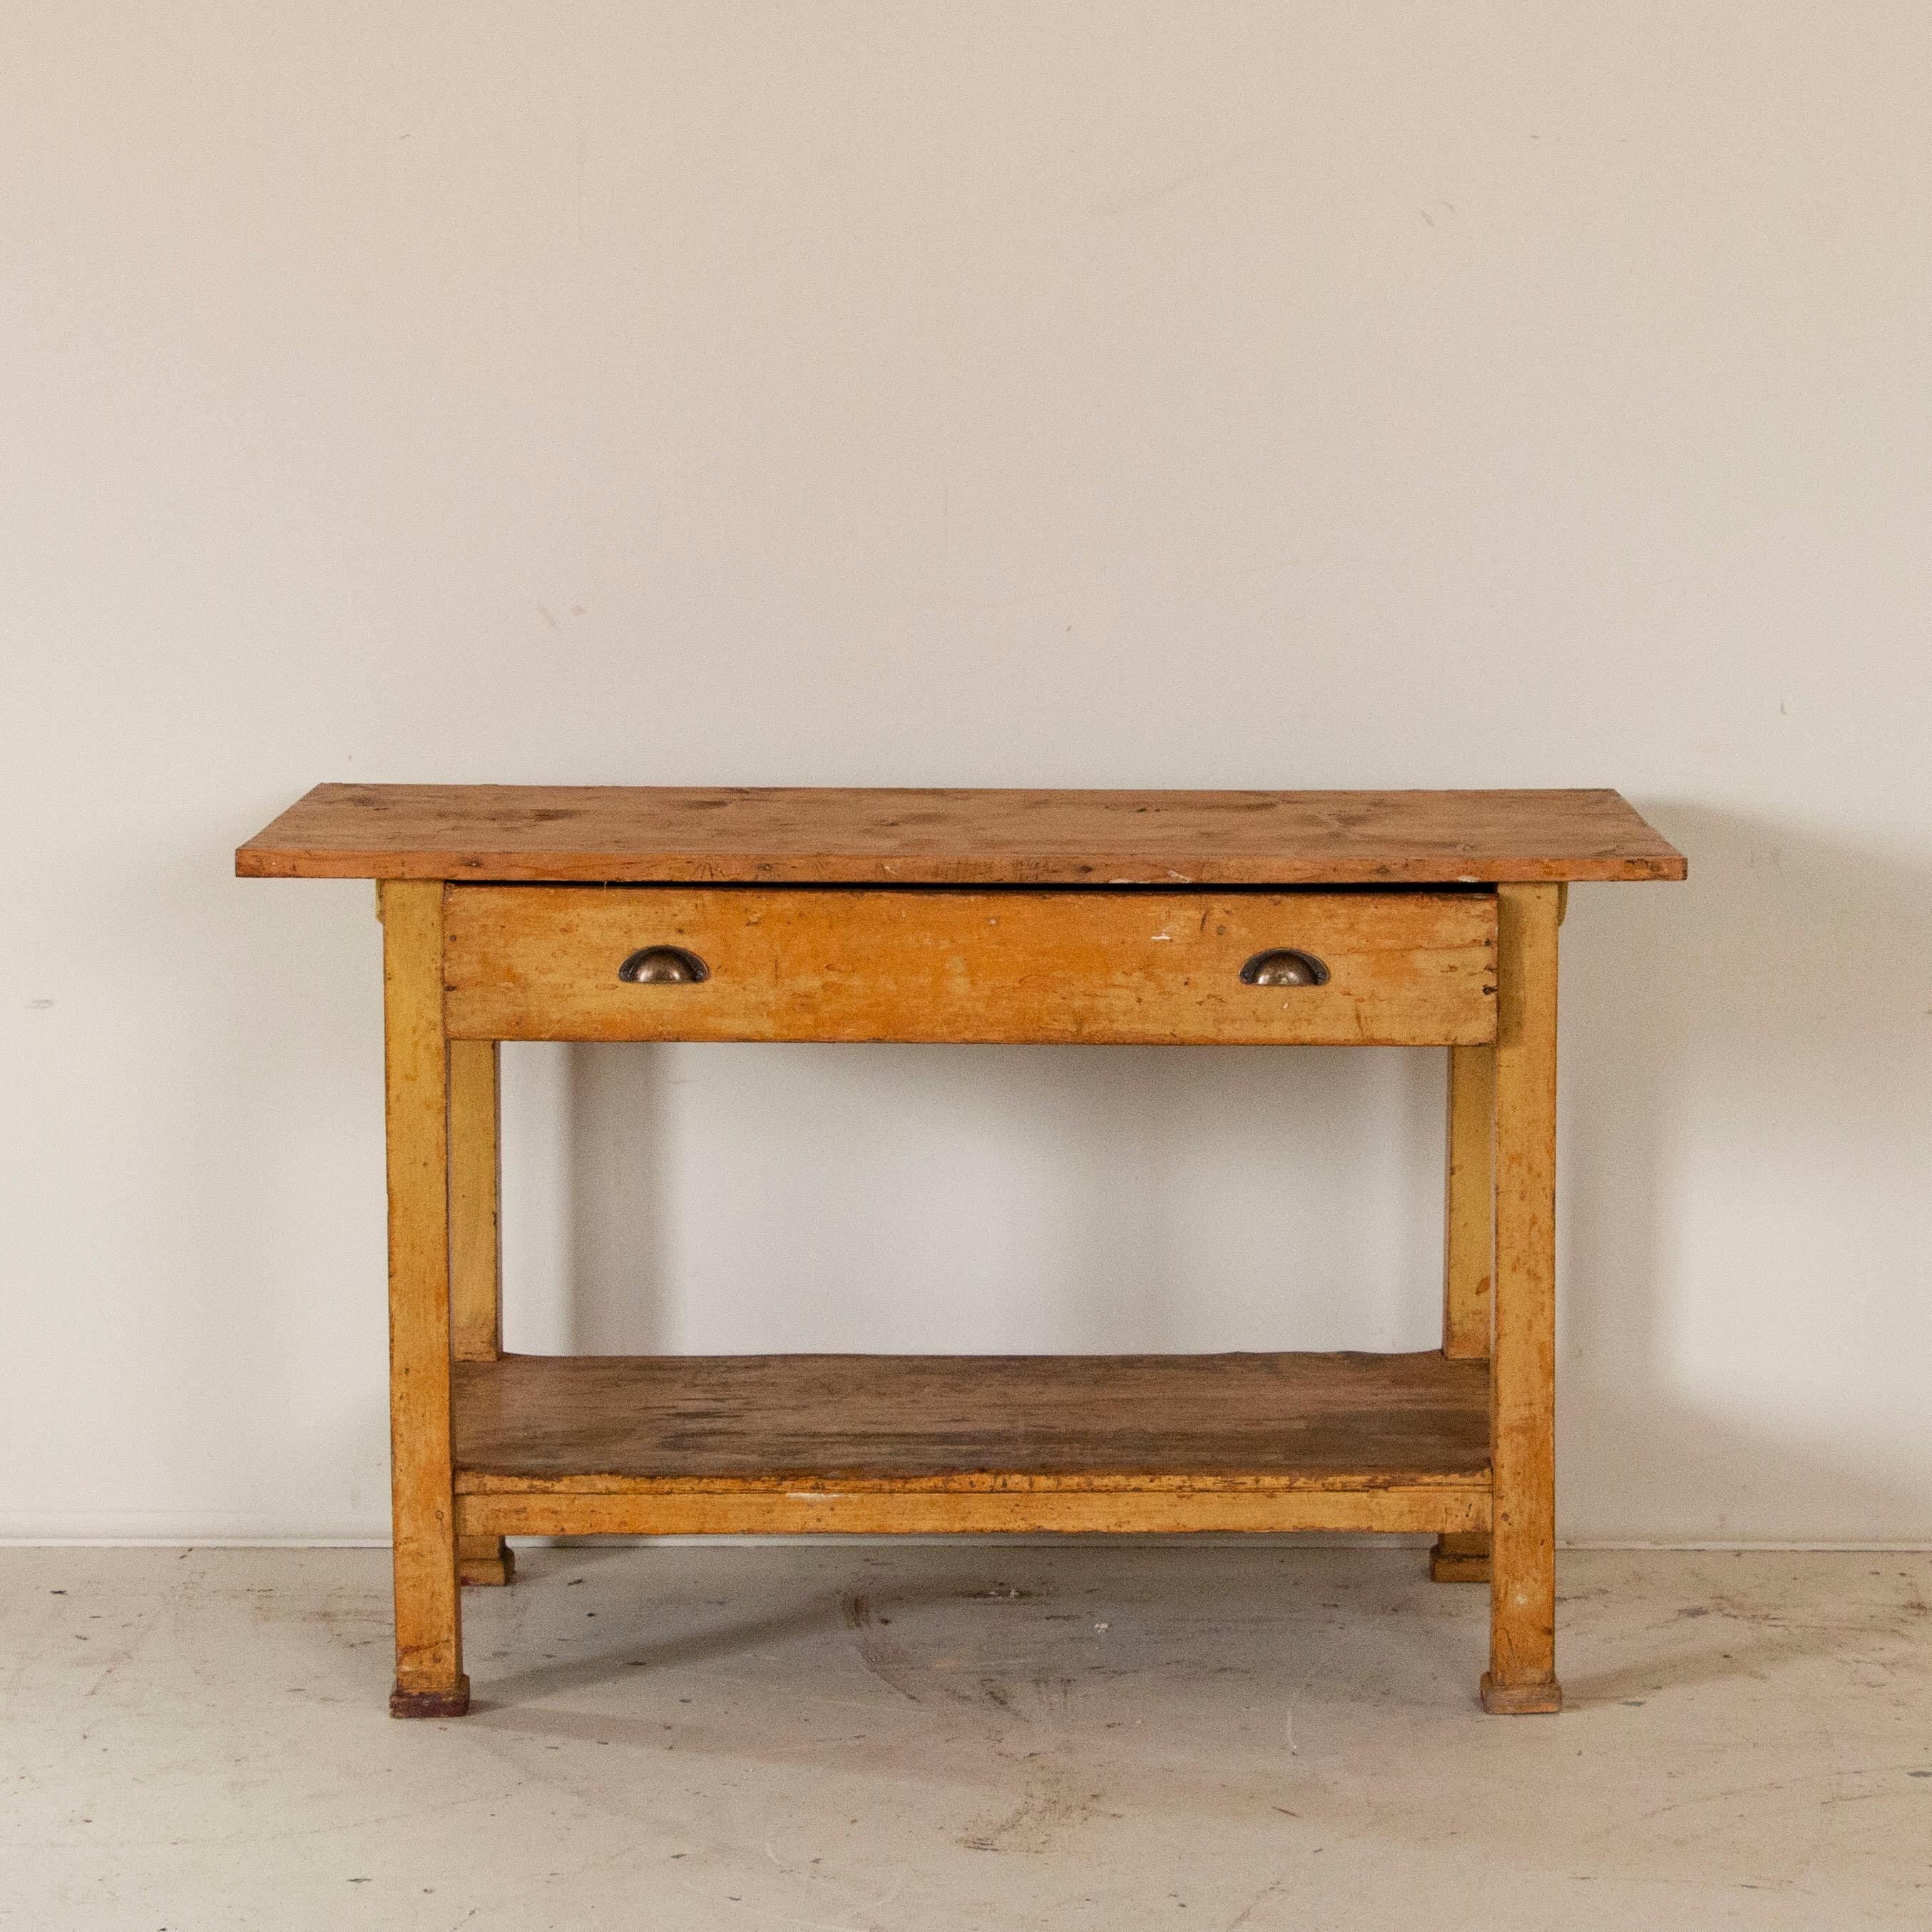 It is the many years of use that fill this old work table with such tremendous character. Notice the base still maintains its original, earth-tone paint while the top is all natural pine distressed to a deeper patina over time. The size of this